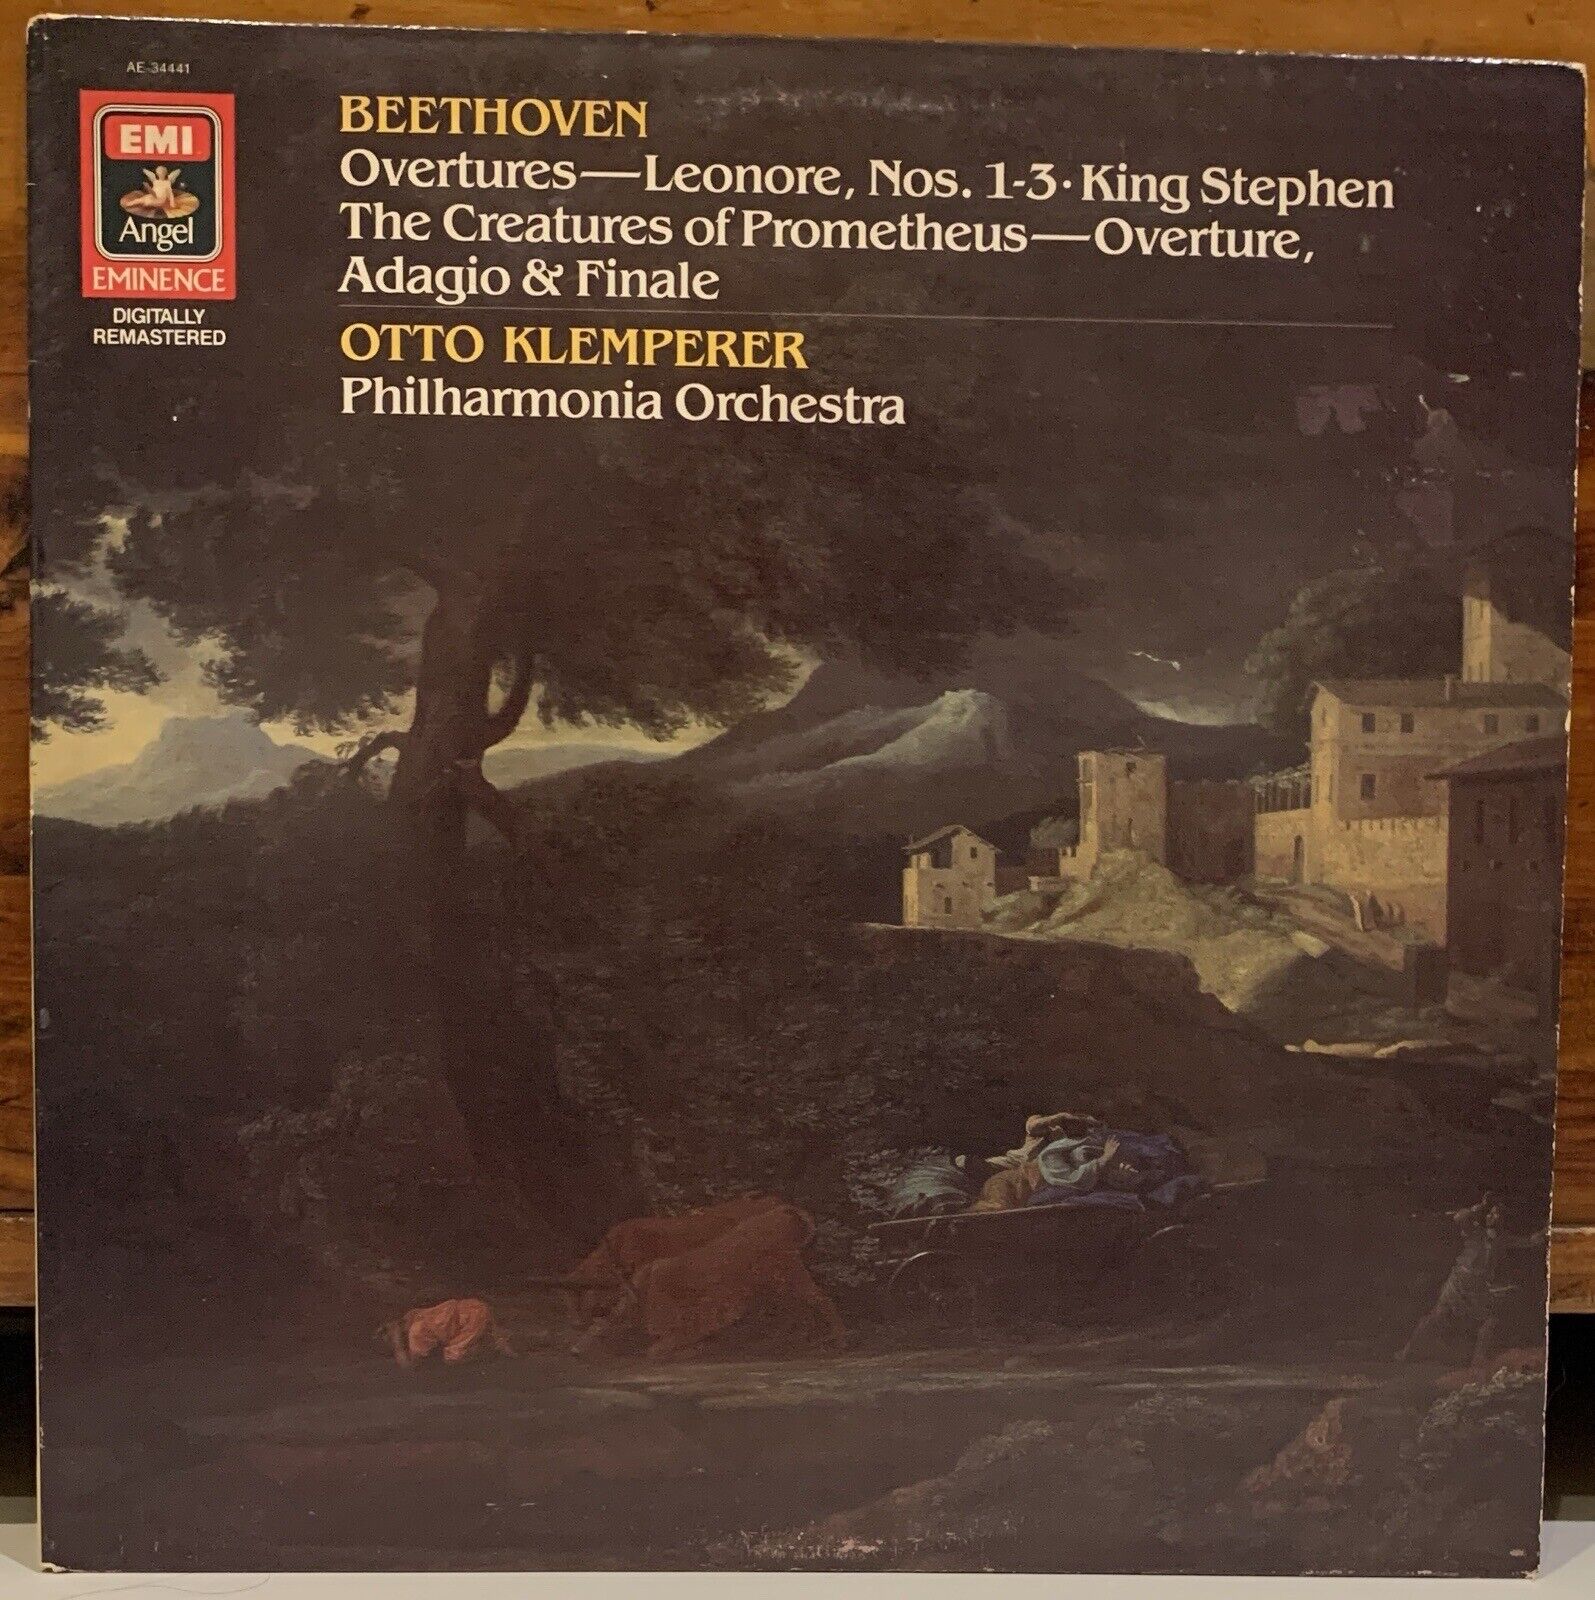 VG+/EX, Beethoven, Overtures Leonore NOS. 1-3, Klemperer Philharmonia Orchestra